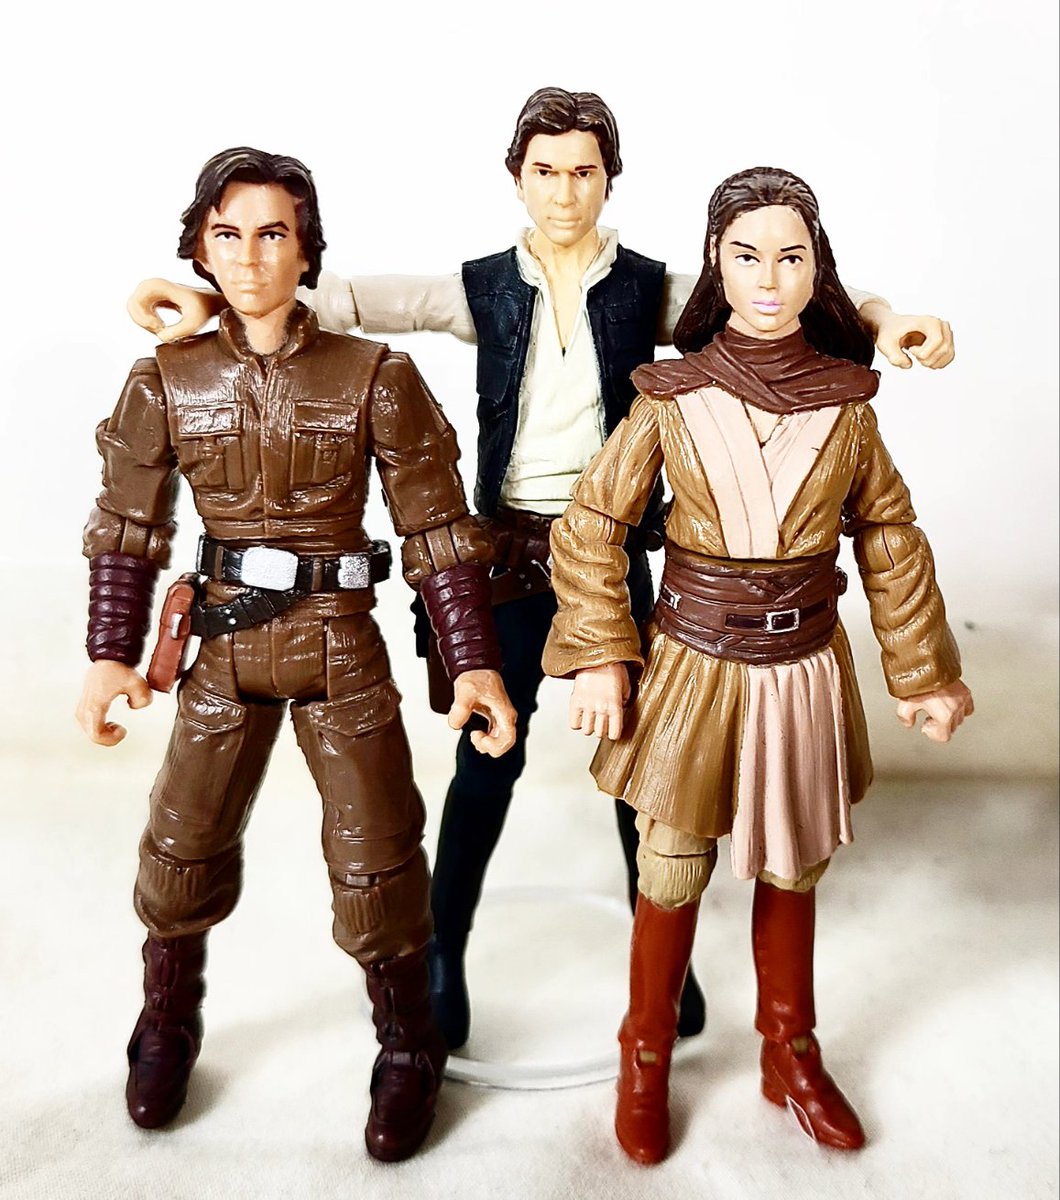 Happy Father's Day 

#starwars #FathersDay #hansolo #jacensolo #jainasolo #starwarseu #starwarseu #starwarslegends